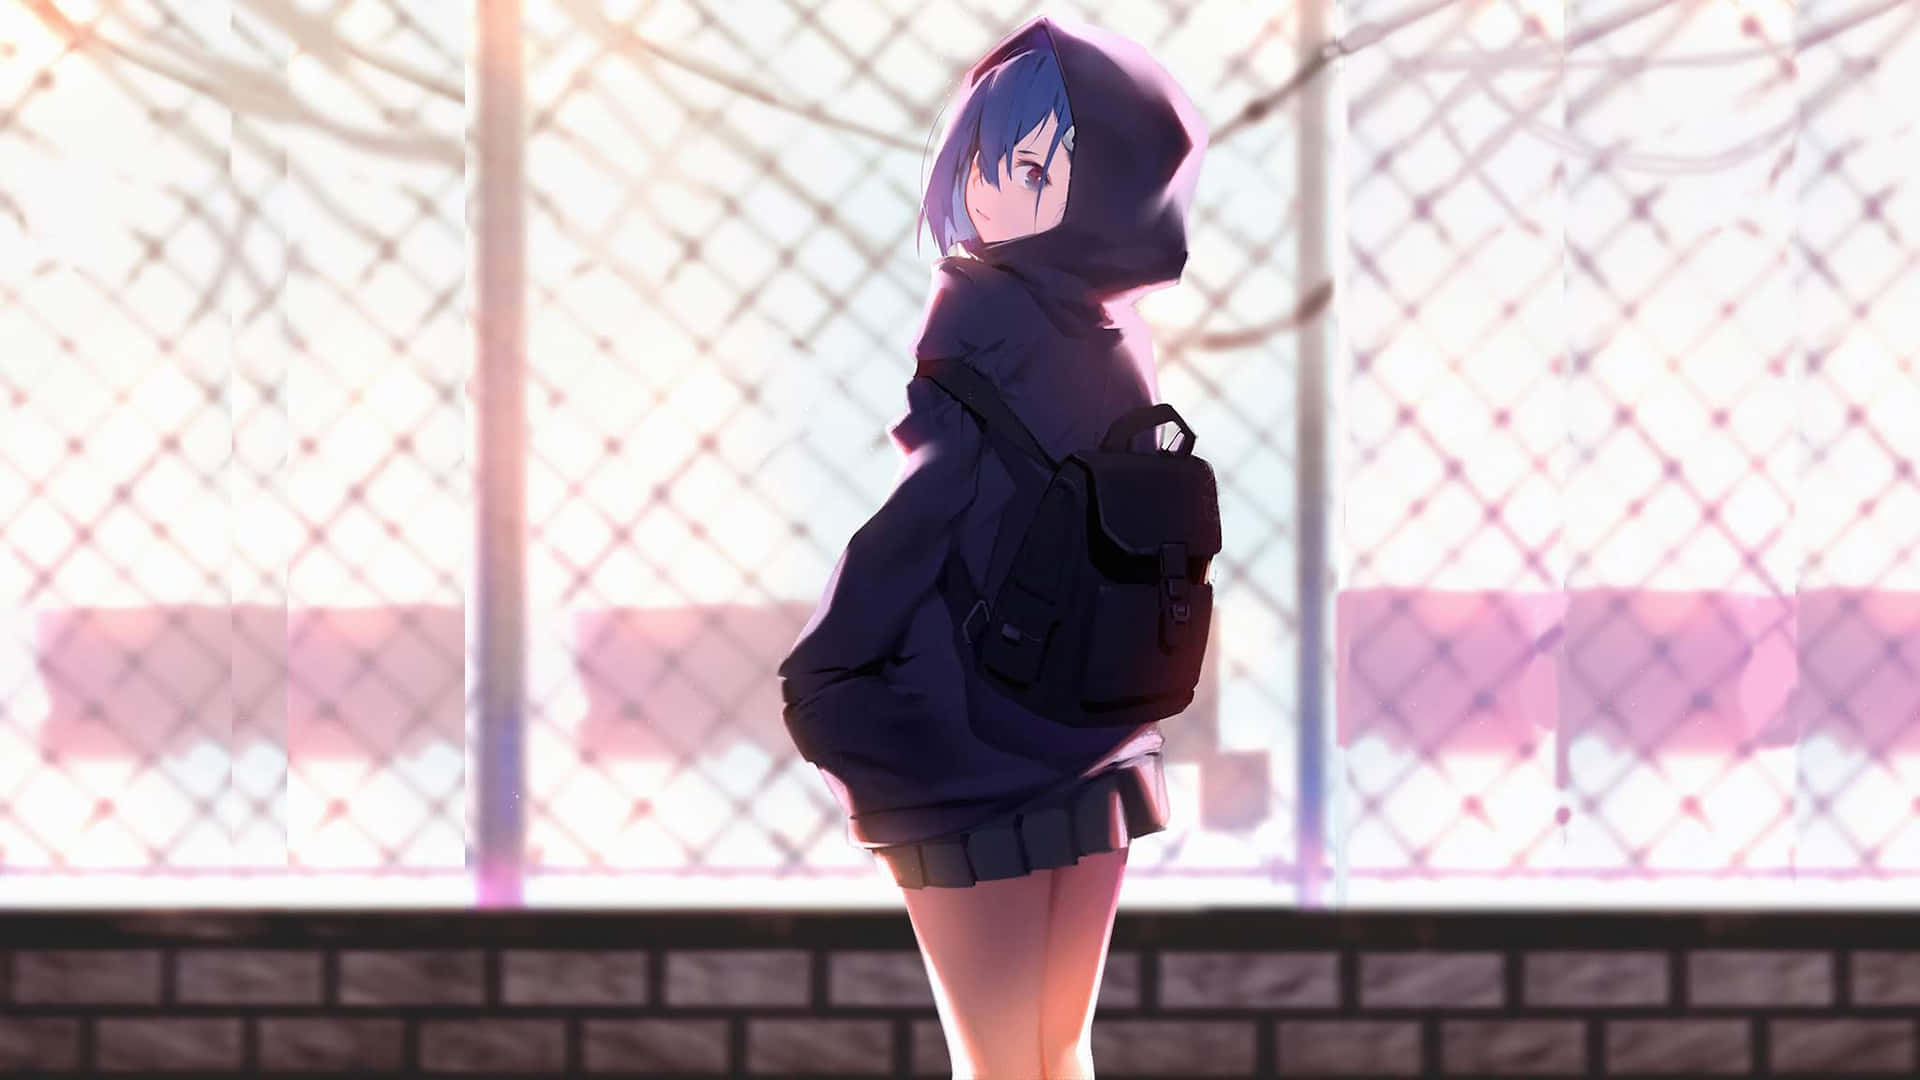 Enjoy a cool look with this stylish Anime Girl Hoodie